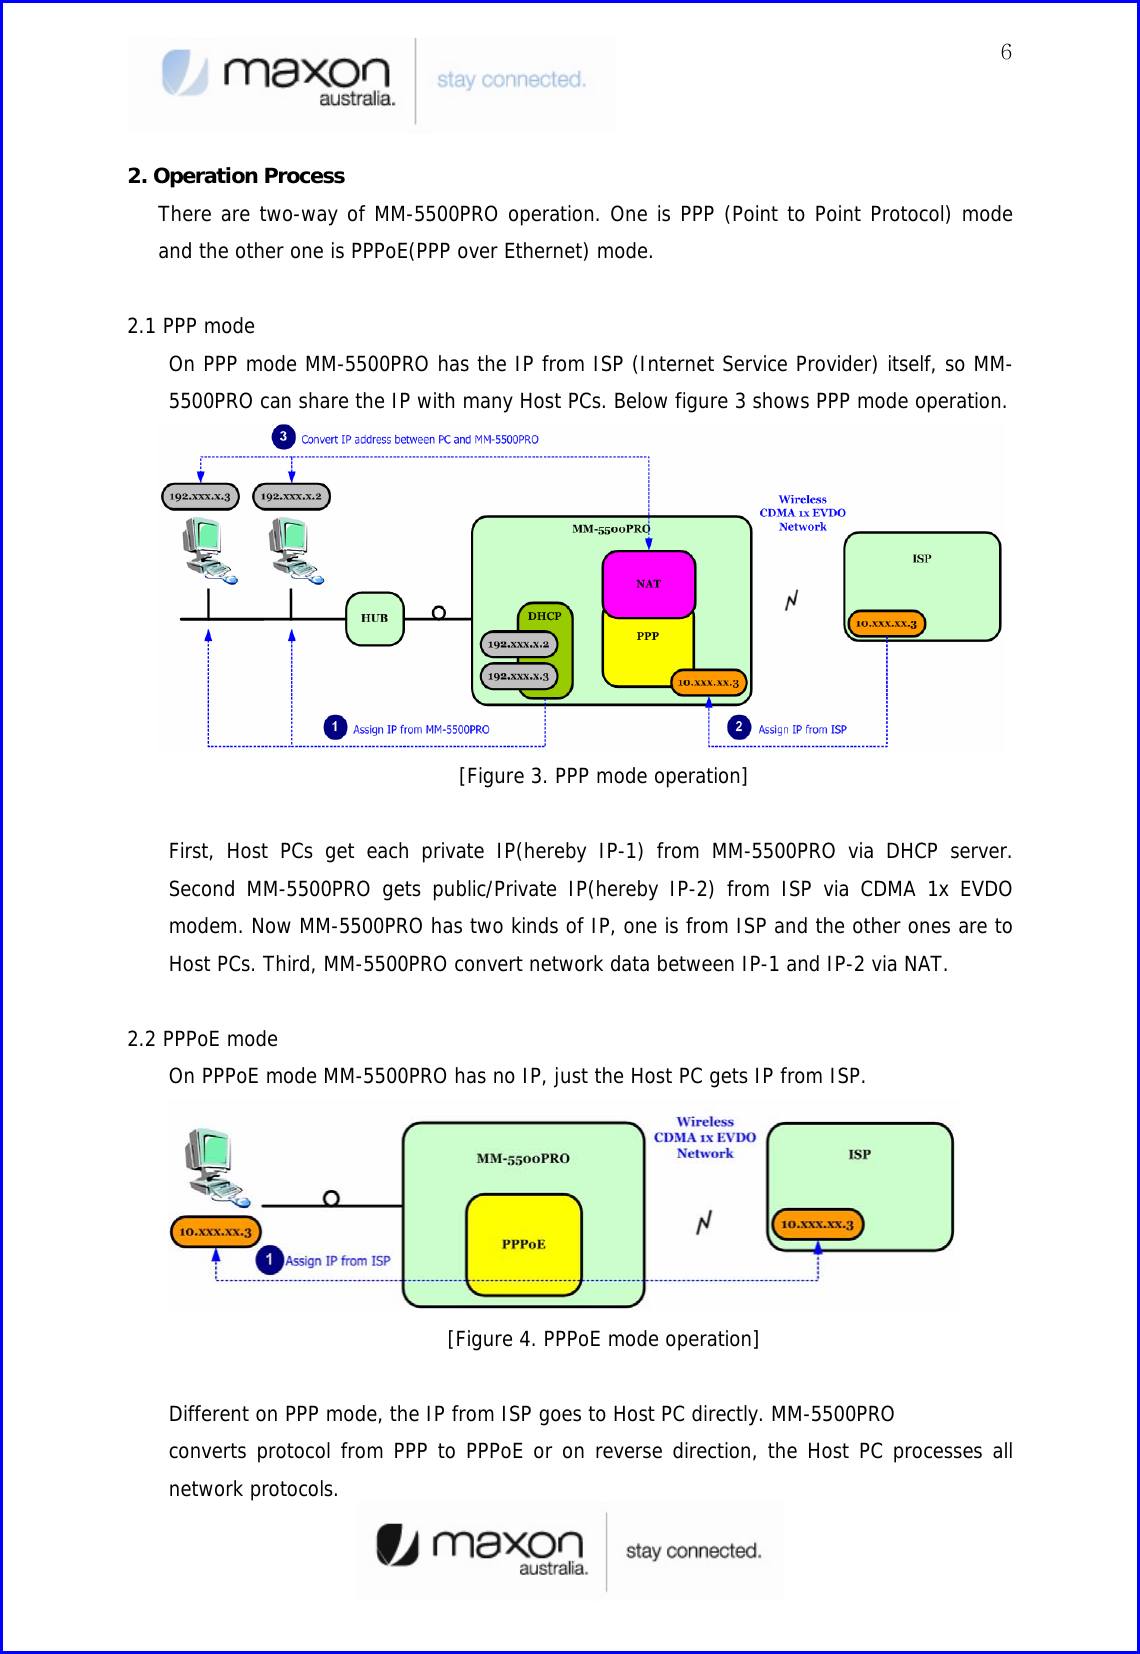  62. Operation Process There are two-way of MM-5500PRO operation. One is PPP (Point to Point Protocol) mode and the other one is PPPoE(PPP over Ethernet) mode.   2.1 PPP mode On PPP mode MM-5500PRO has the IP from ISP (Internet Service Provider) itself, so MM-5500PRO can share the IP with many Host PCs. Below figure 3 shows PPP mode operation.      [Figure 3. PPP mode operation]   First, Host PCs get each private IP(hereby IP-1) from MM-5500PRO via DHCP server. Second MM-5500PRO gets public/Private IP(hereby IP-2) from ISP via CDMA 1x EVDO modem. Now MM-5500PRO has two kinds of IP, one is from ISP and the other ones are to Host PCs. Third, MM-5500PRO convert network data between IP-1 and IP-2 via NAT.  2.2 PPPoE mode On PPPoE mode MM-5500PRO has no IP, just the Host PC gets IP from ISP.      [Figure 4. PPPoE mode operation]   Different on PPP mode, the IP from ISP goes to Host PC directly. MM-5500PRO   converts protocol from PPP to PPPoE or on reverse direction, the Host PC processes all network protocols. 